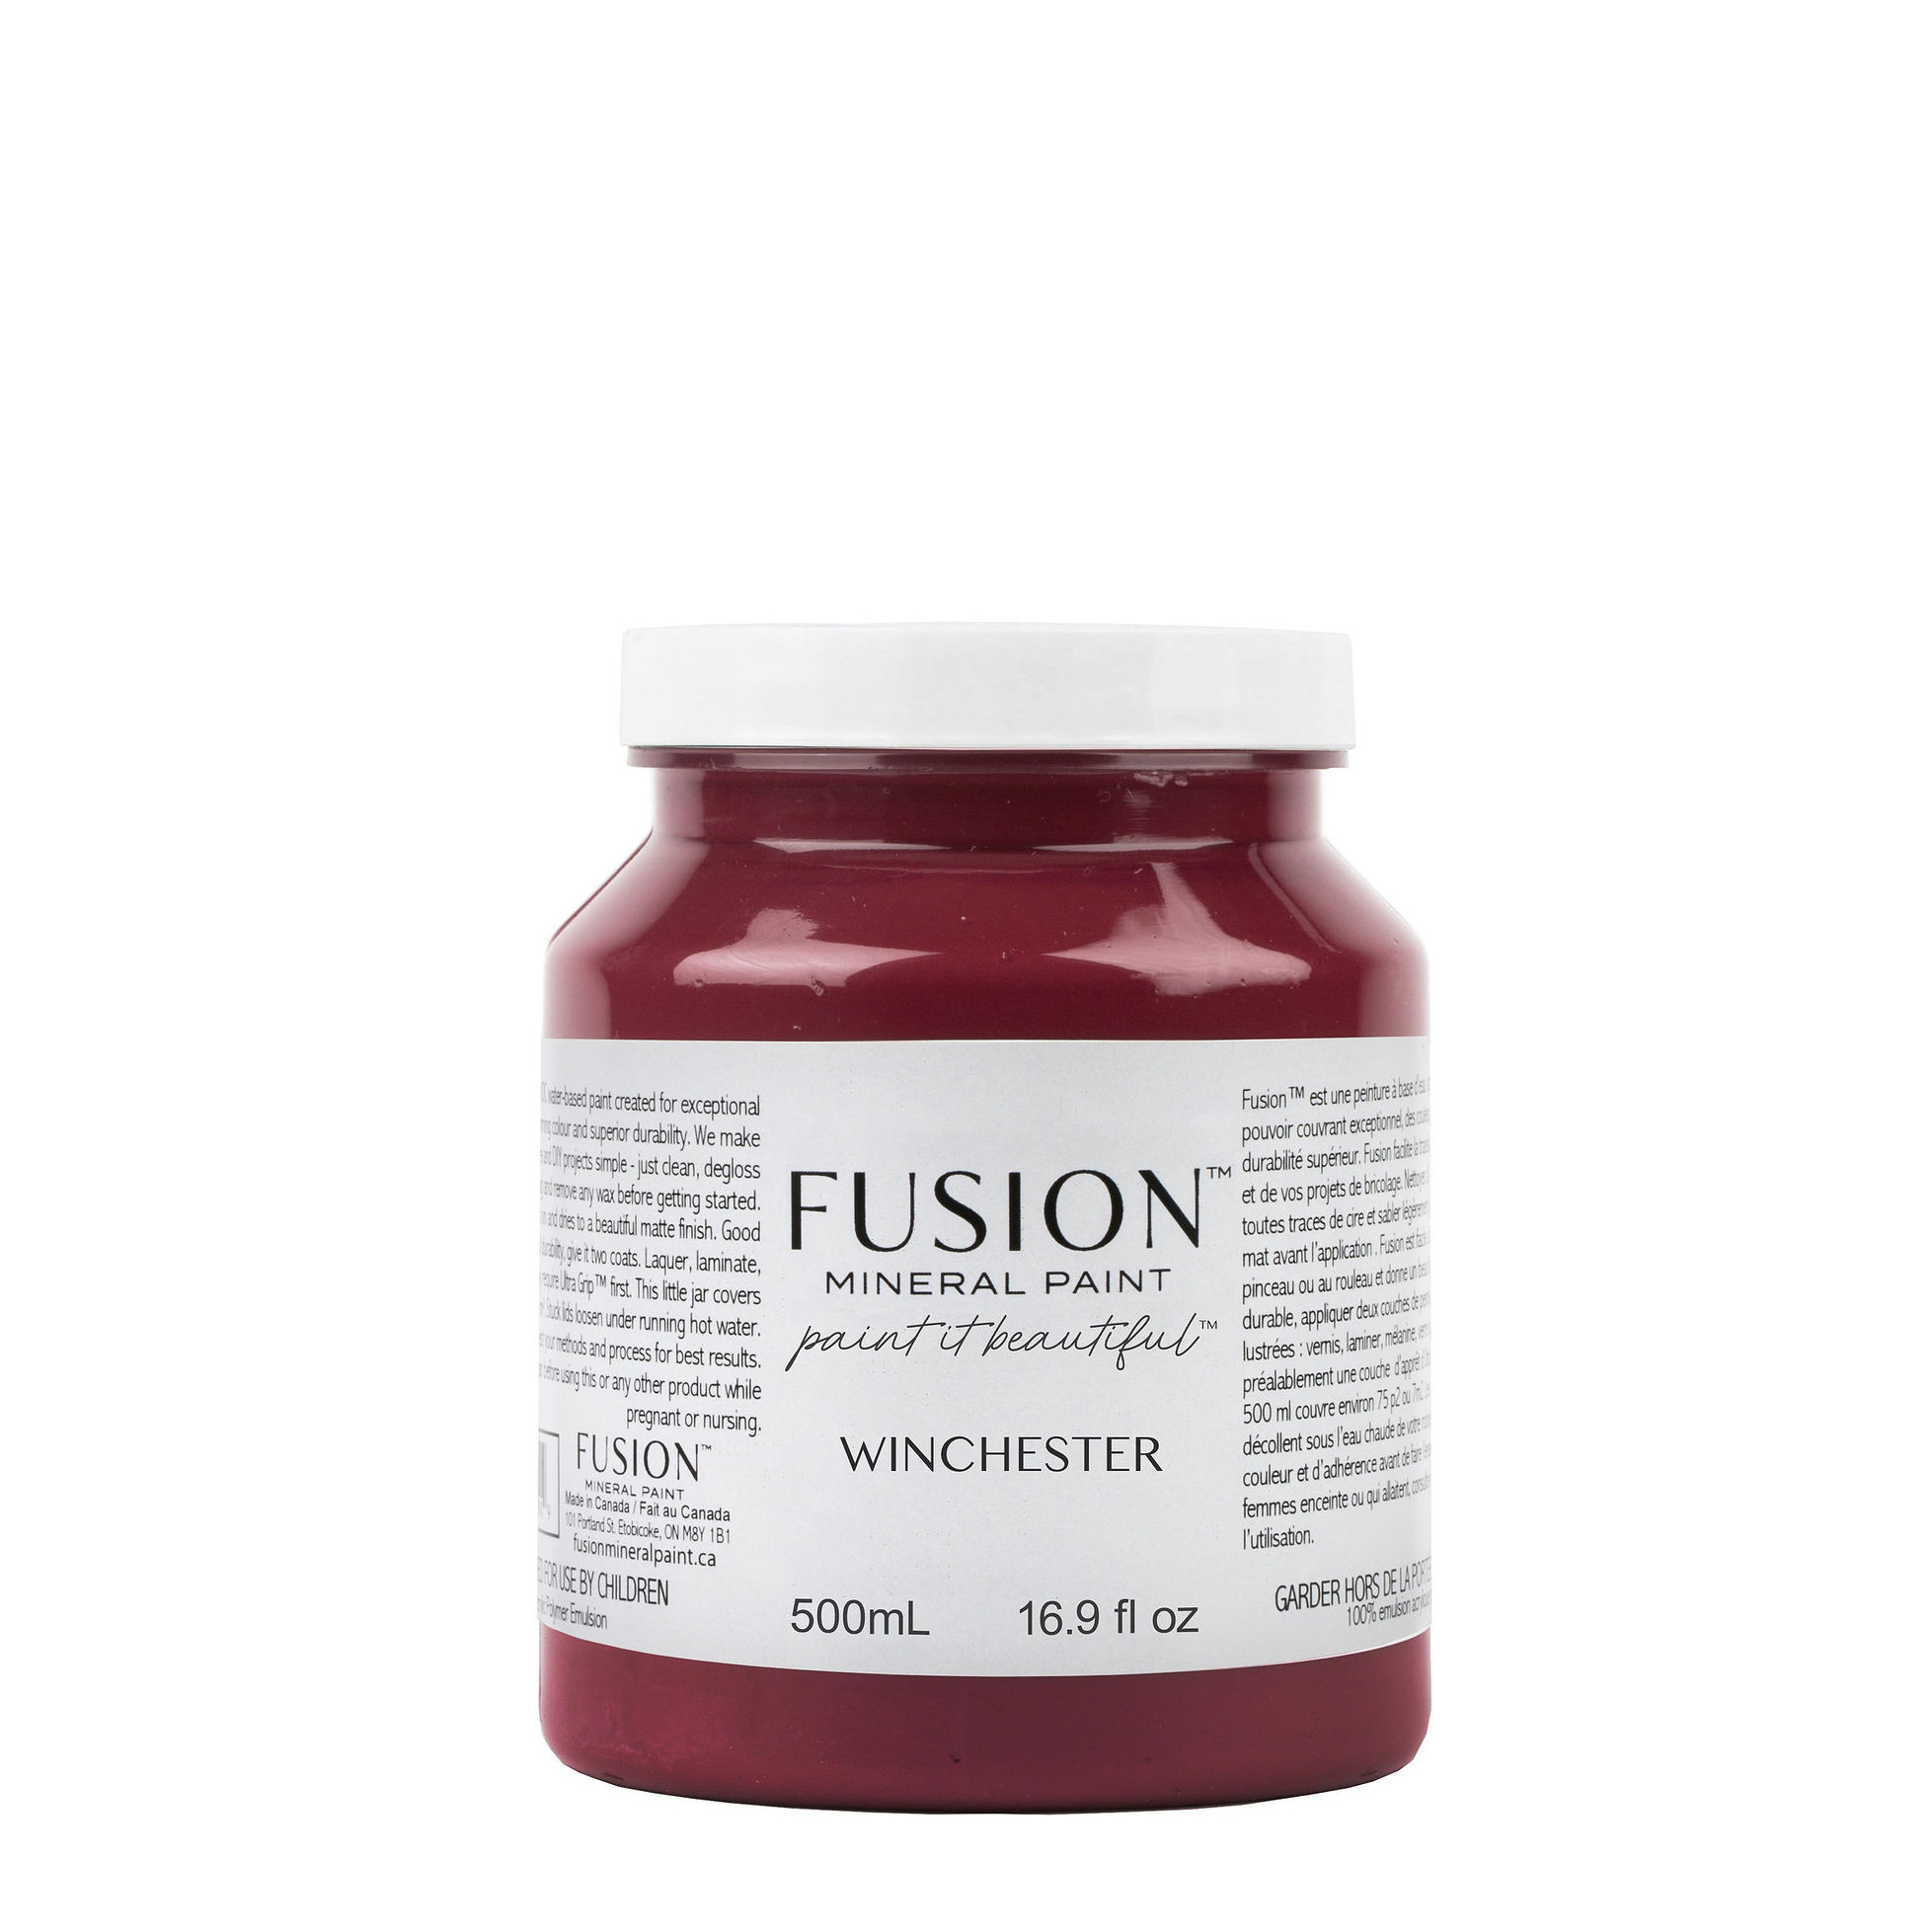 Fusion Mineral Paint Fusion - Winchester - 500ml